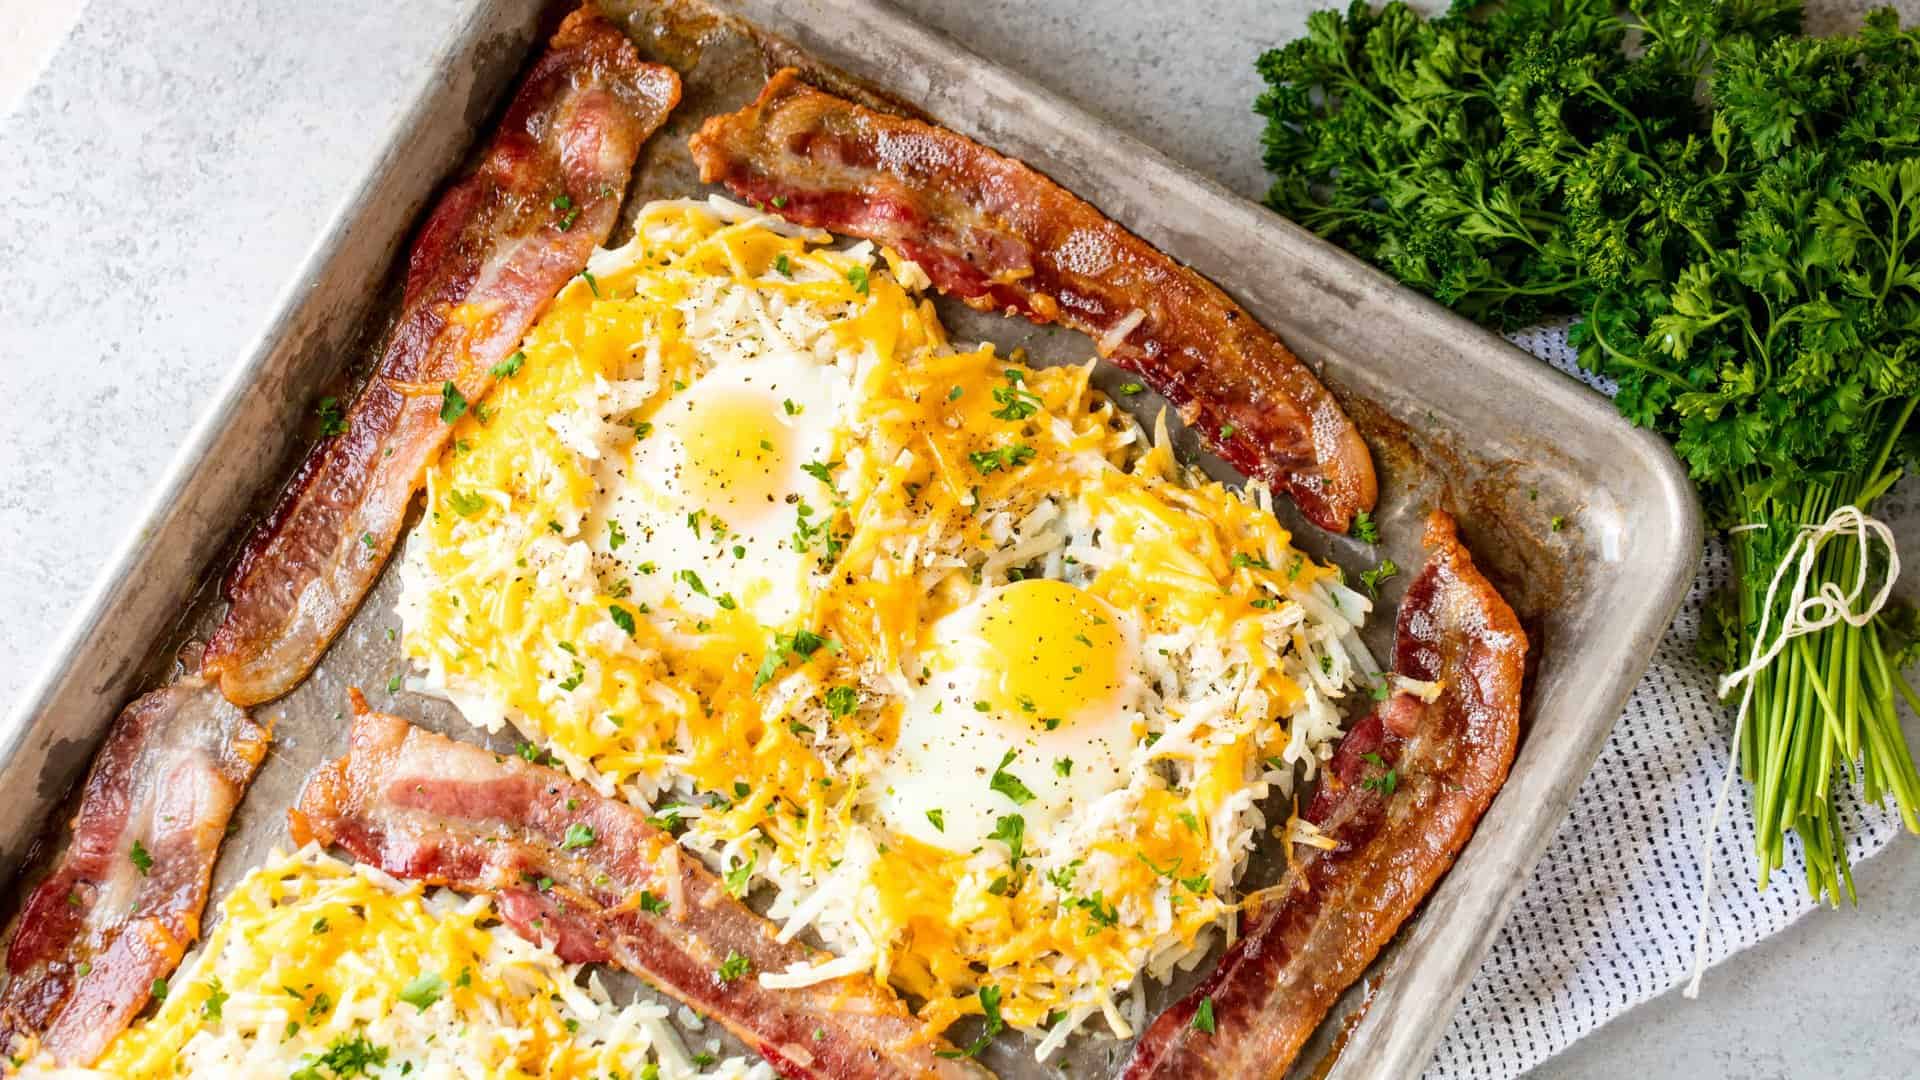 This super easy One Pan Breakfast Bake has bacon, hash browns, and eggs and takes just five minutes of hands on time to create a complete breakfast.